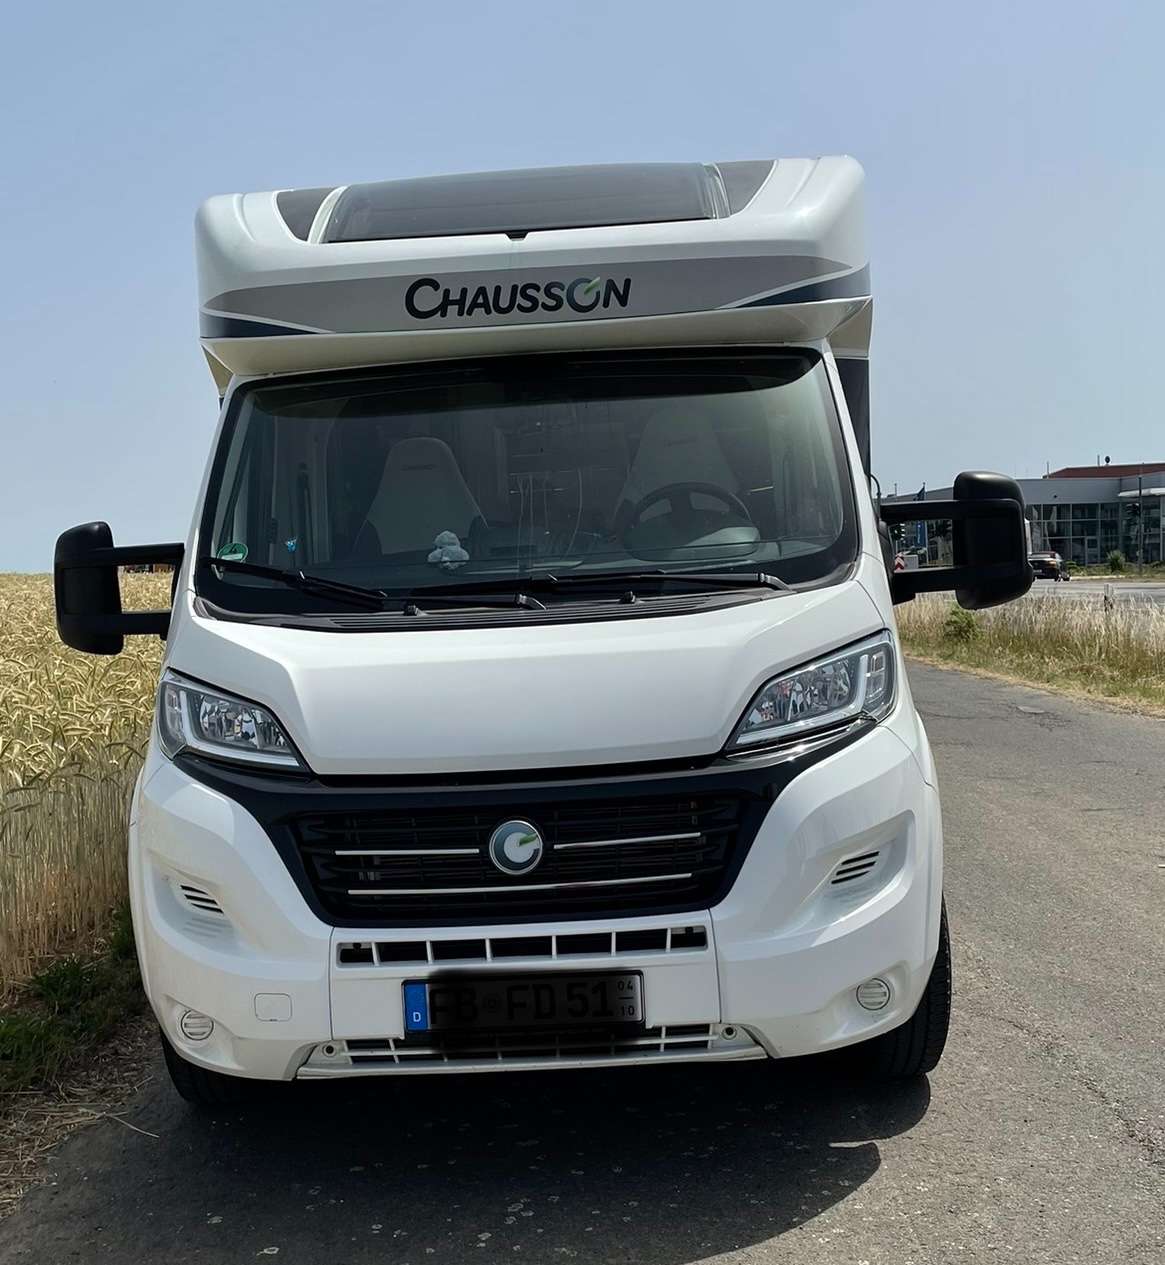 Caravans-Wohnm Chausson Other in White used in Bad Vilbel for € 71,900.-